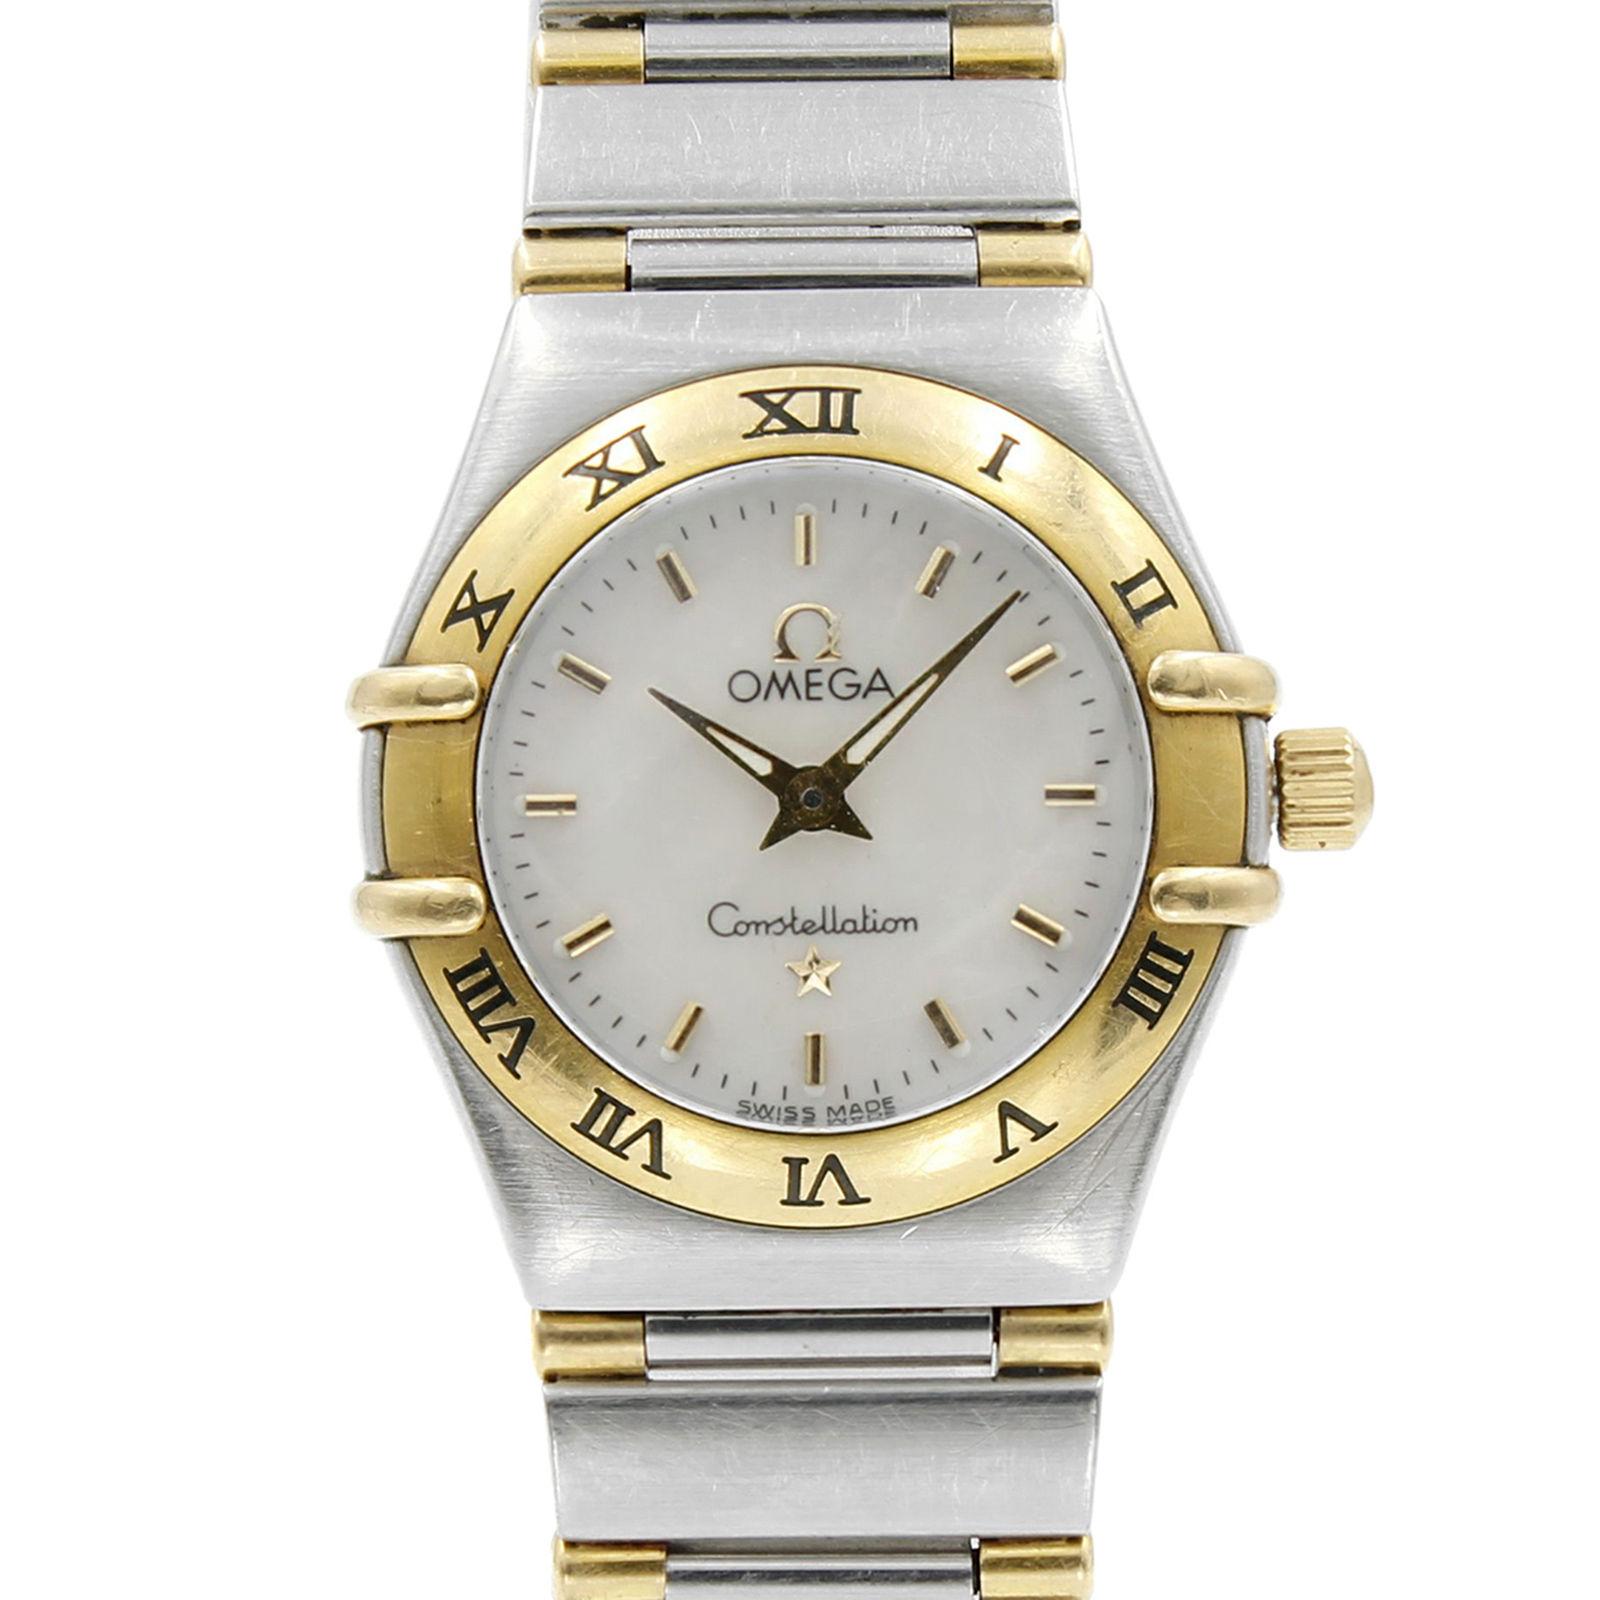 This pre-owned Omega Constellation 95 1362.30.00 is a beautiful Ladies timepiece that is powered by a quartz movement which is cased in a stainless steel case. It has a round shape face, no features dial and has hand sticks style markers. It is